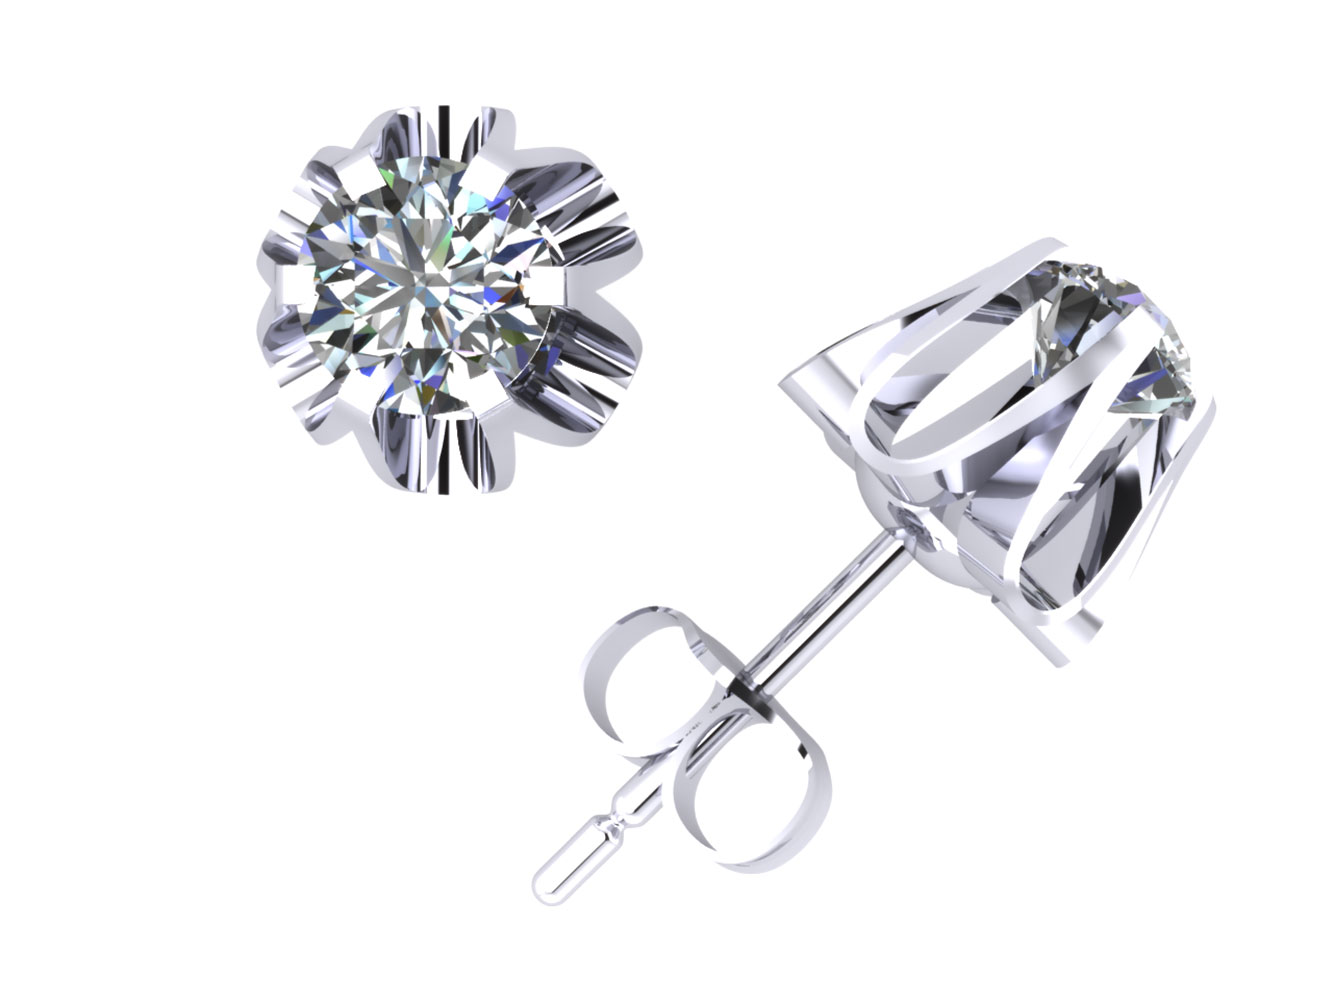 Jewel We Sell 0.4Carat Round Cut Diamond Buttercup Stud Earrings 14Kt White or Yellow Gold 6Prong GH I1